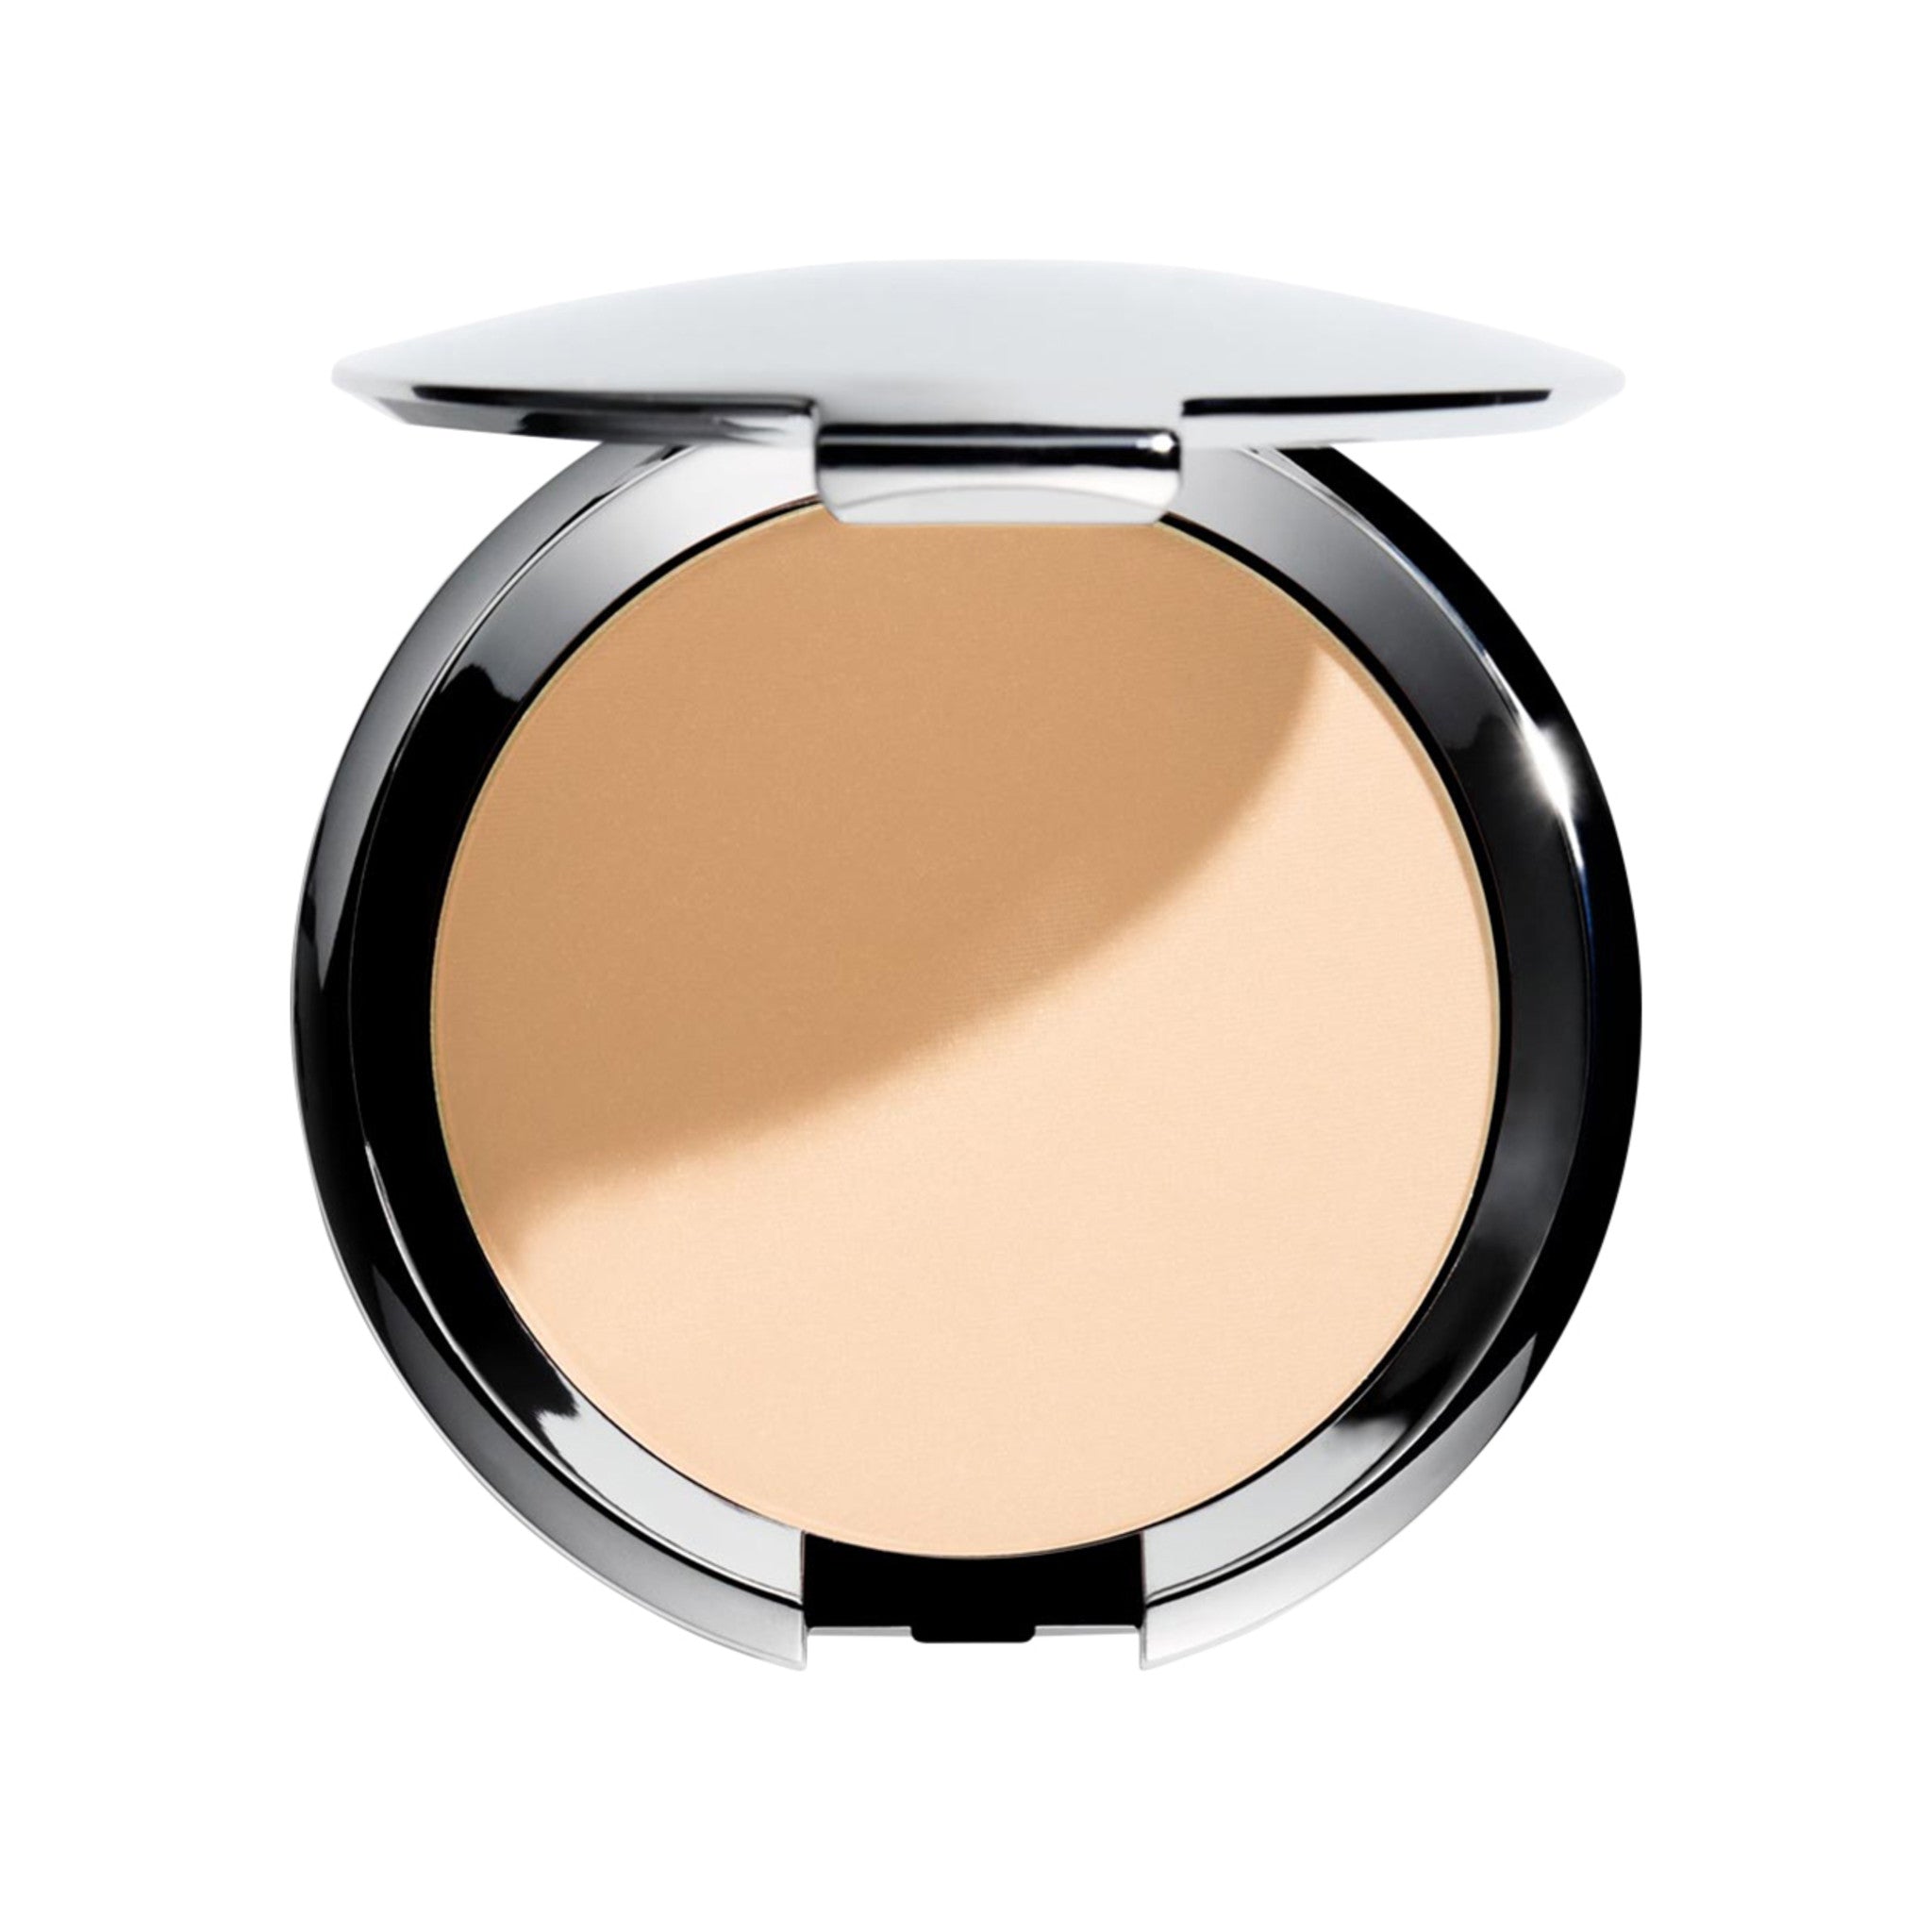 Chantecaille Compact Makeup Color/Shade variant: Shell main image. This product is for light warm neutral golden complexions